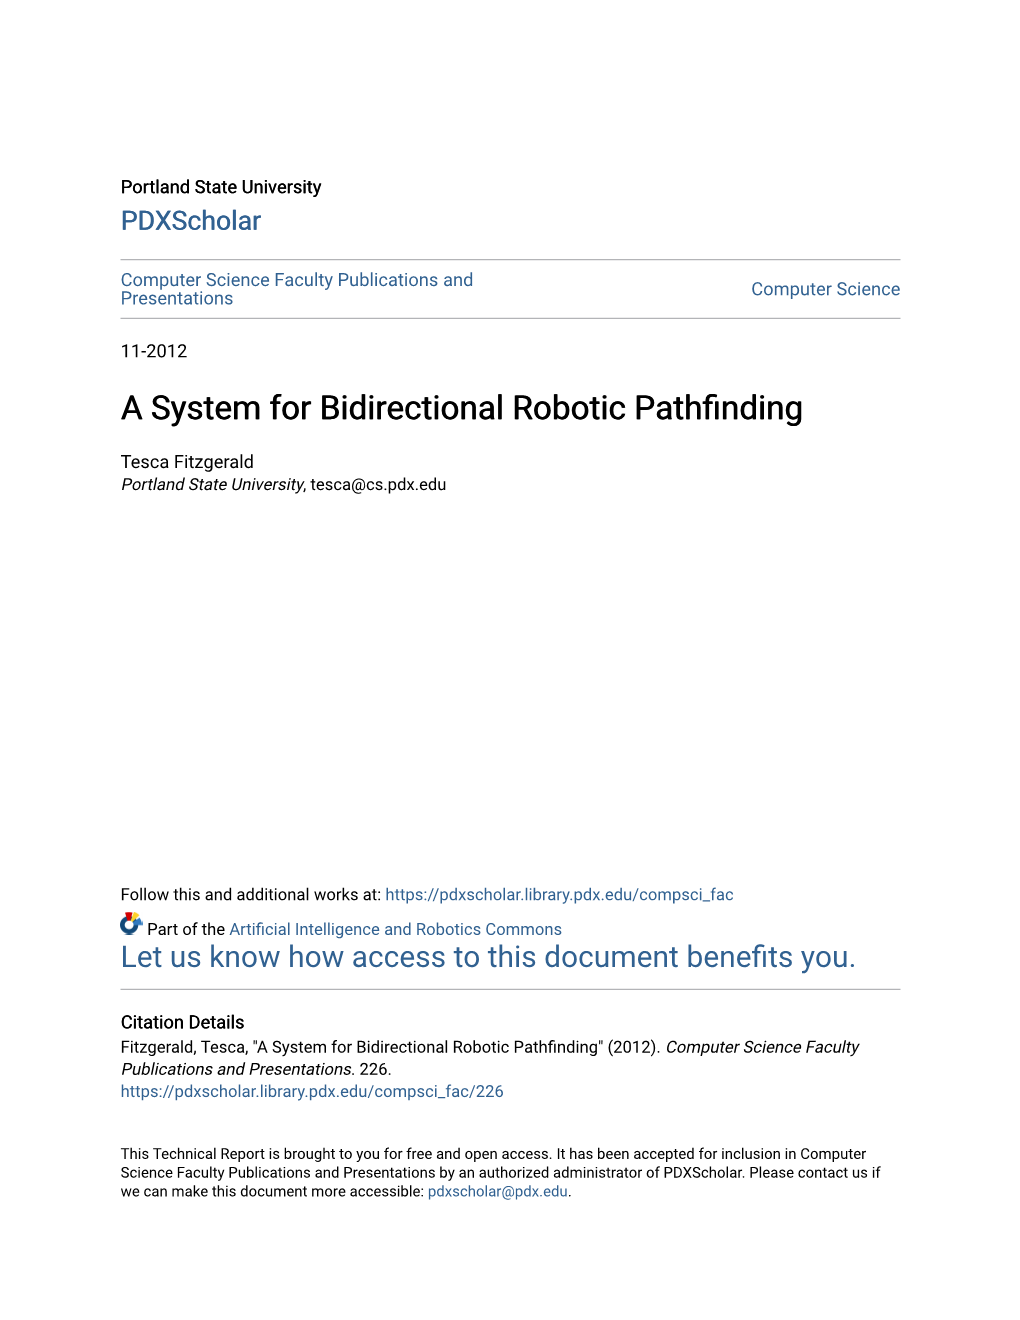 A System for Bidirectional Robotic Pathfinding